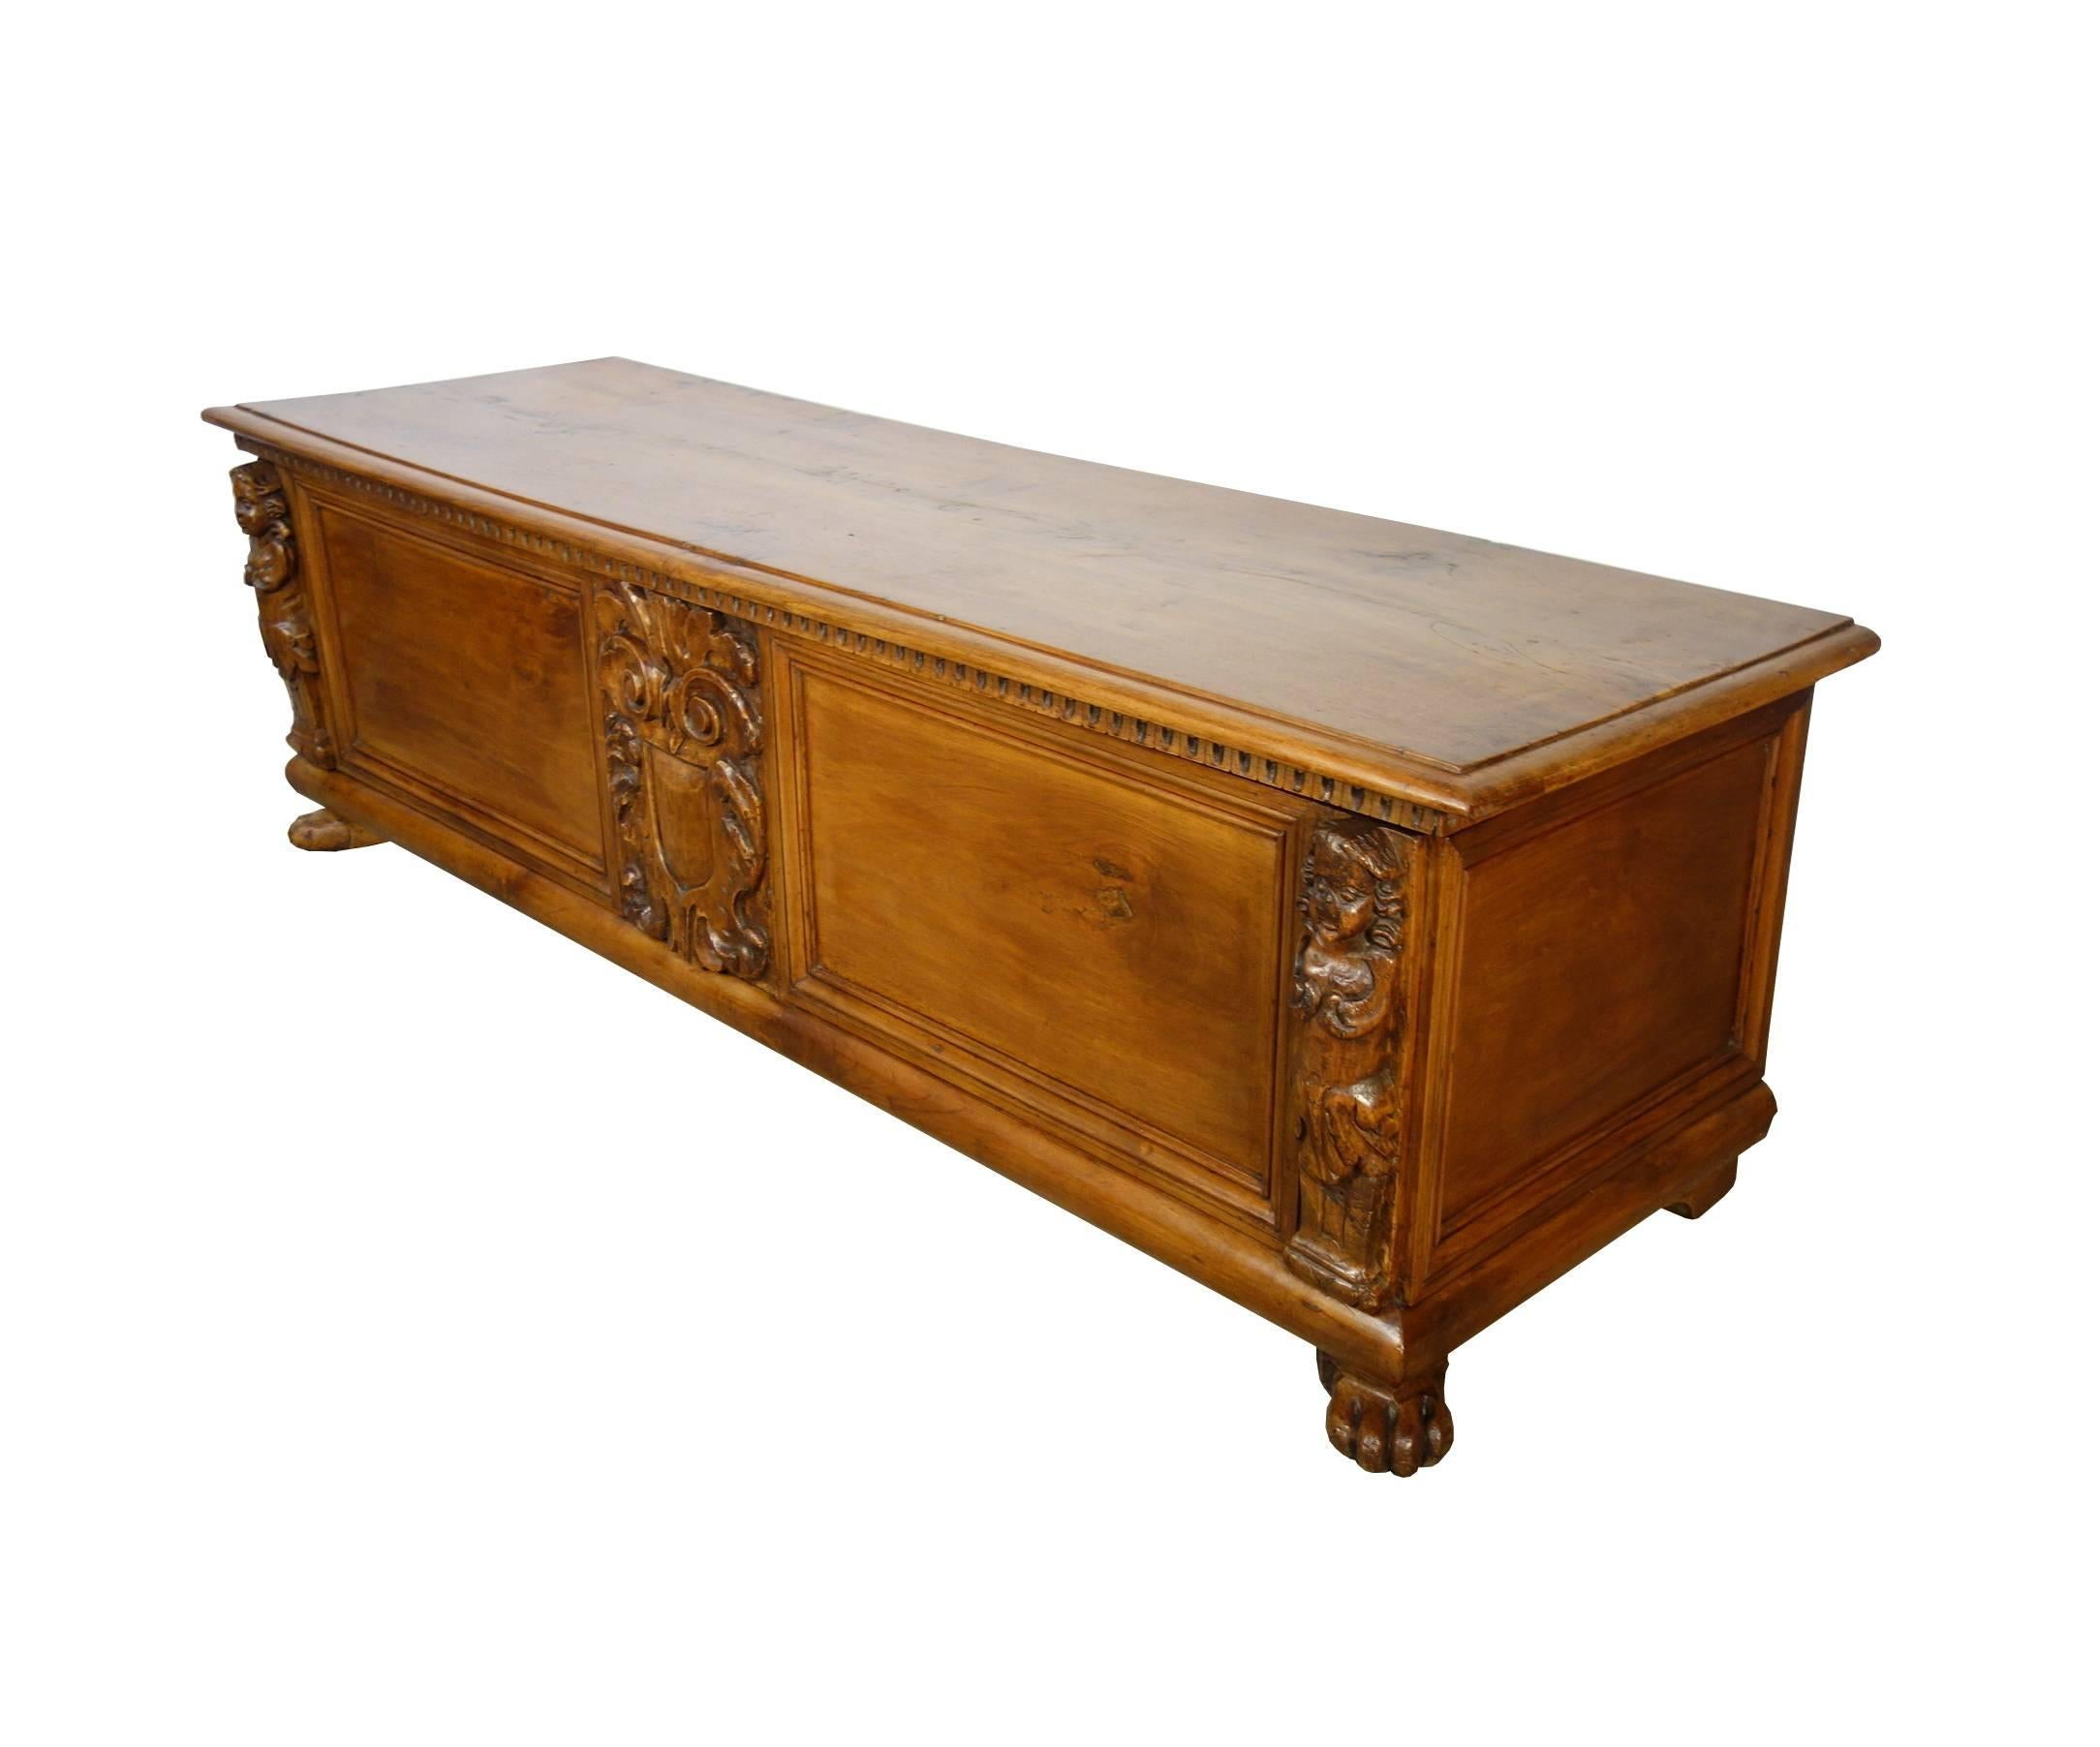 Impressive 17th century Tuscan solid walnut long trunk with hand-carved caryatids and family crest. Simple lines and elegant. Light walnut color.

Measures: 67.5